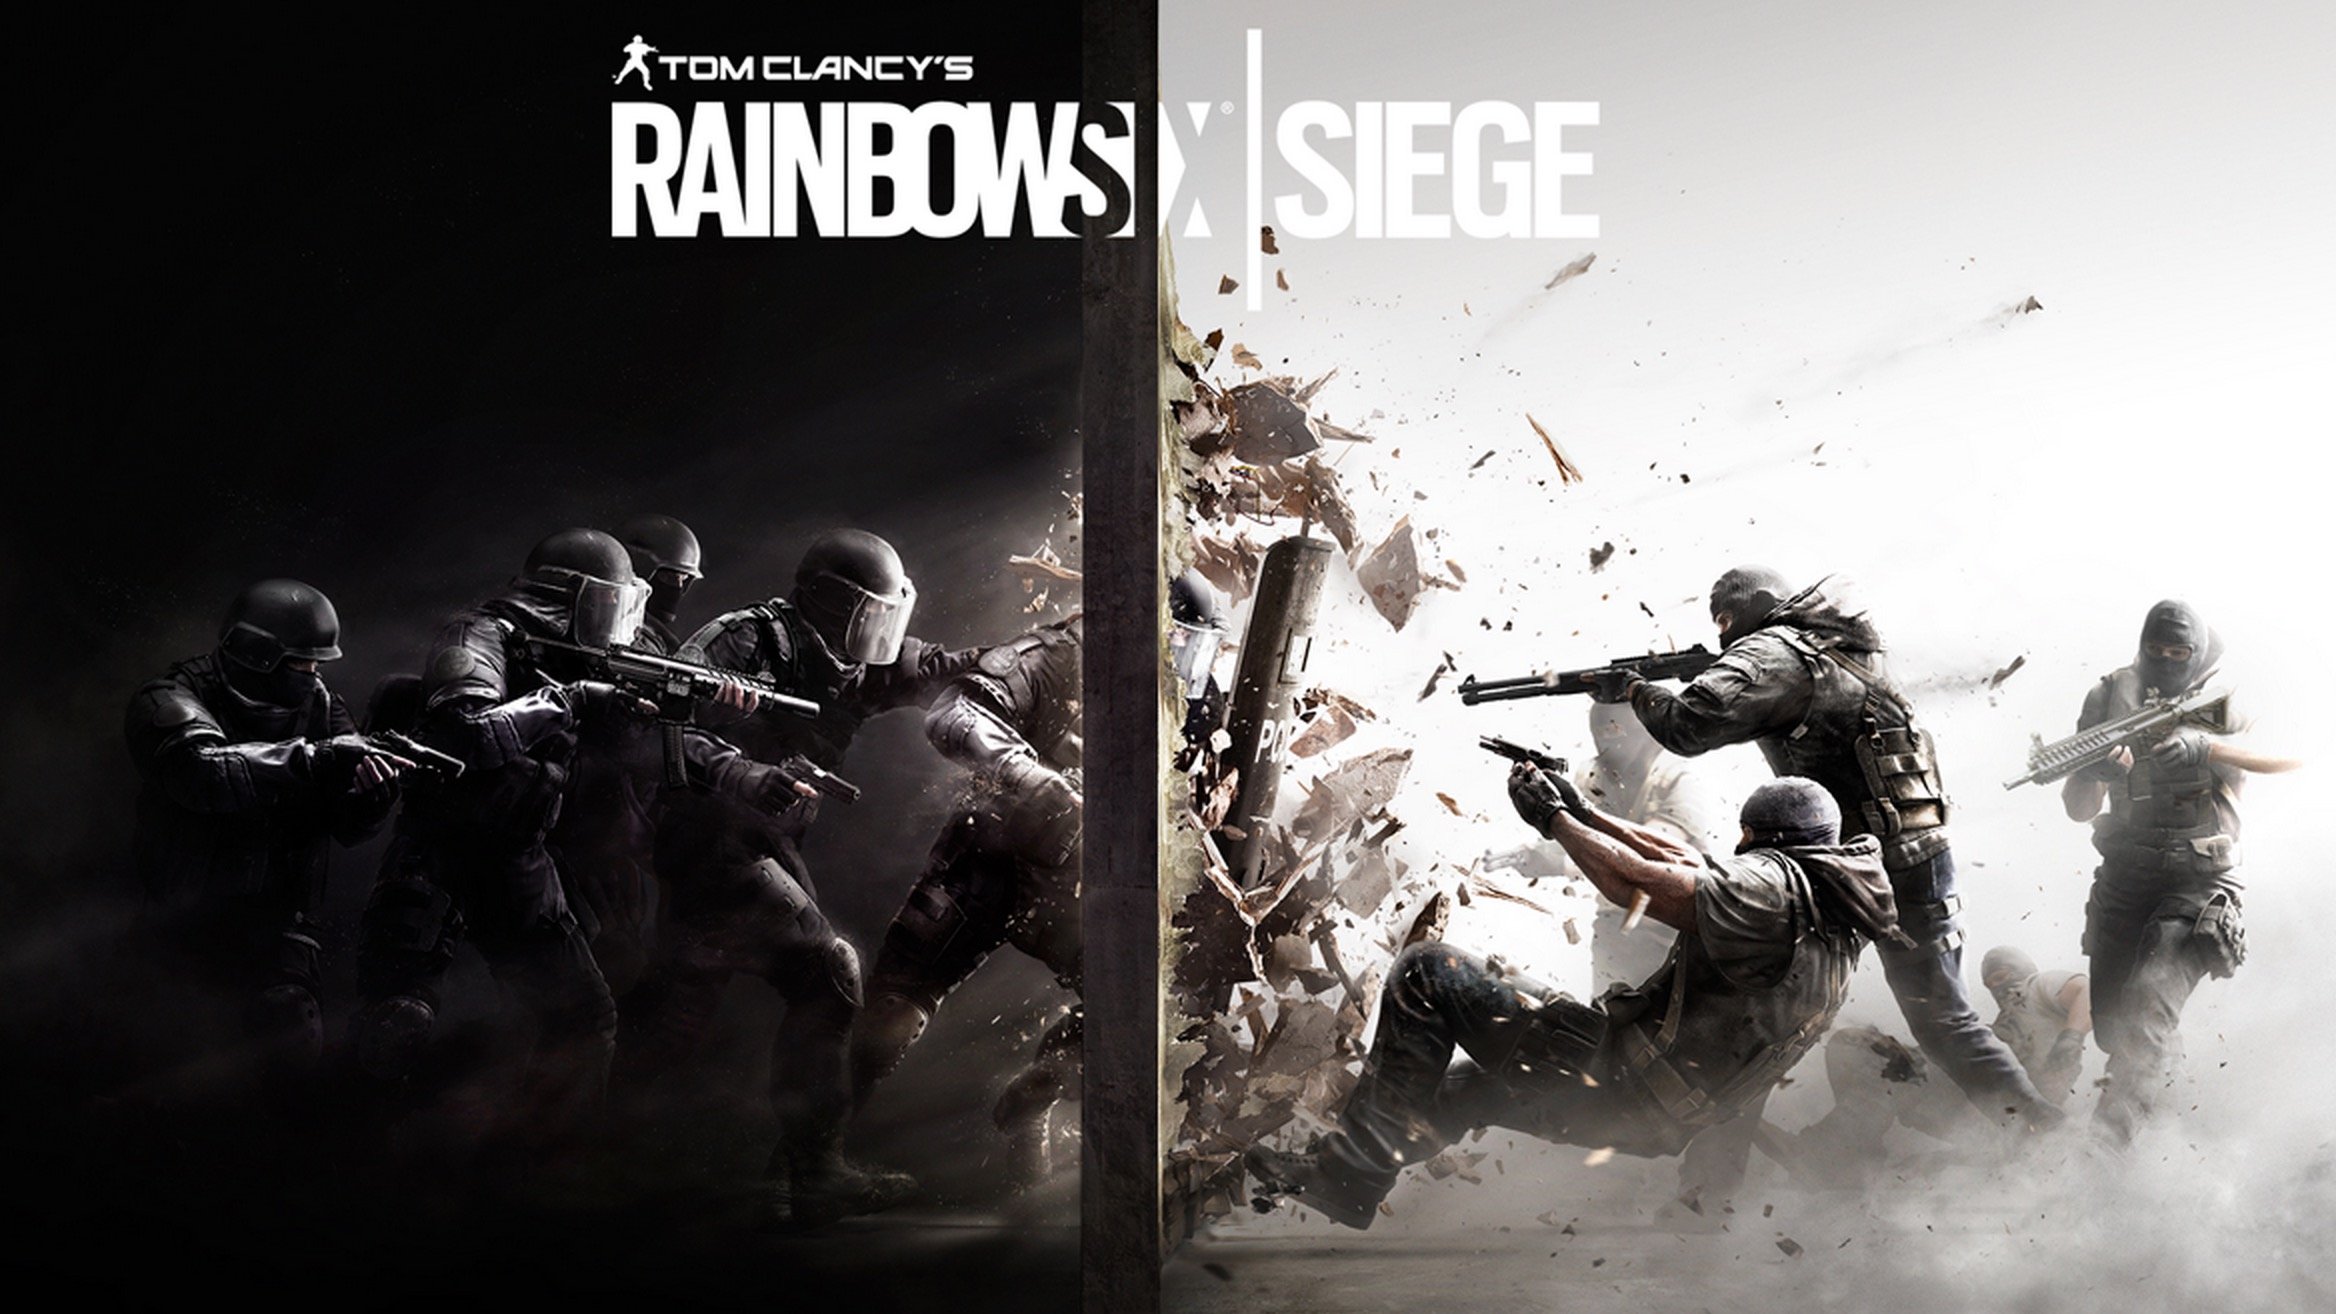 Get the first two Rainbow Six games free on Xbox One.